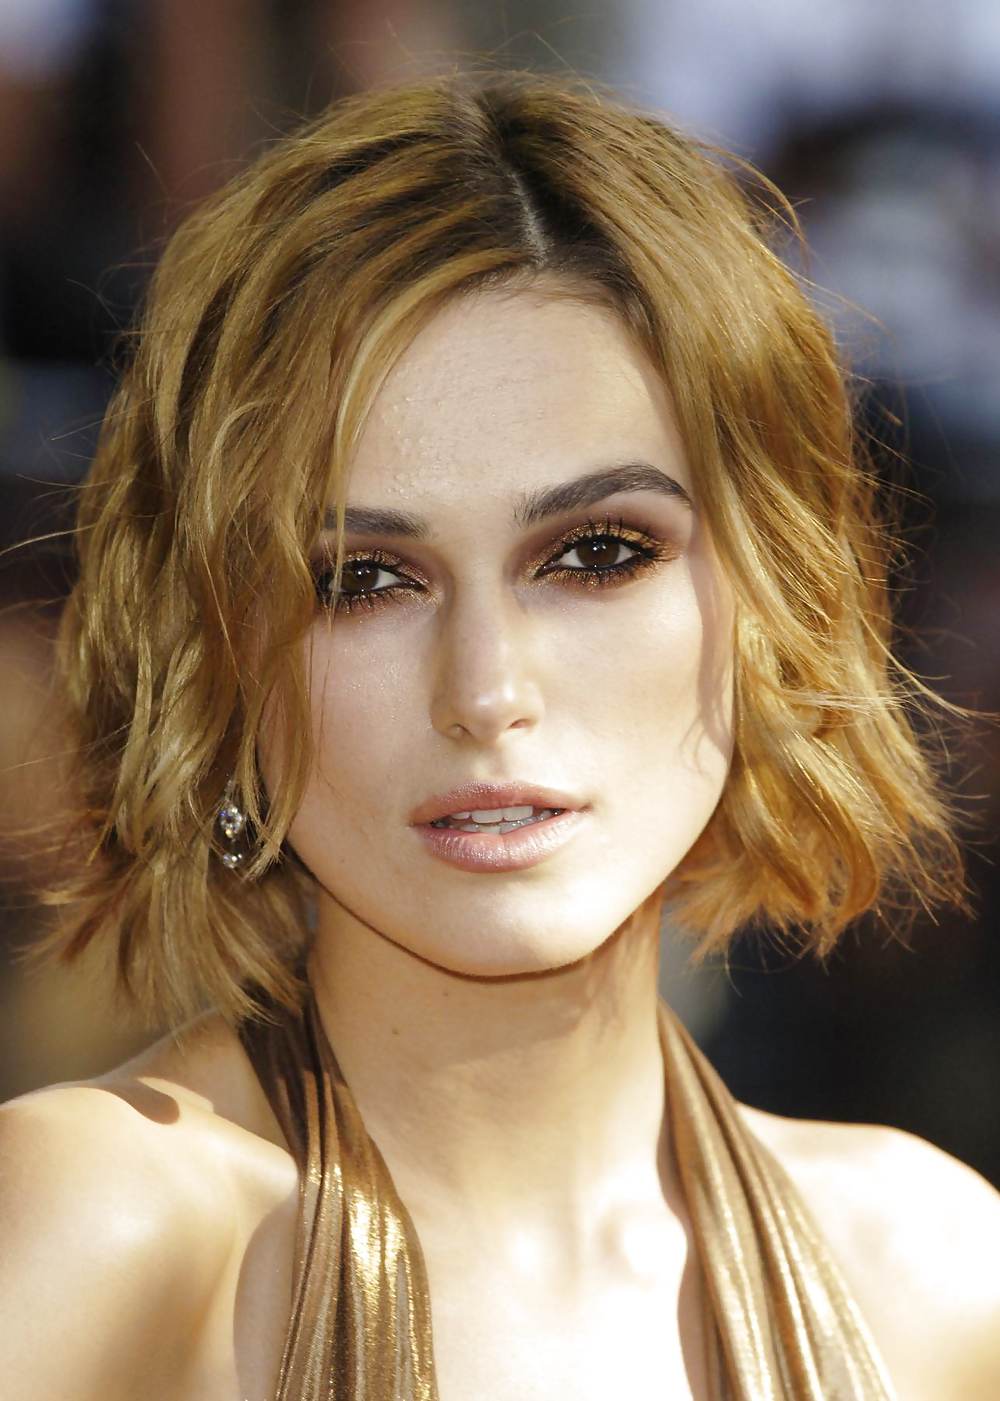 Keira Knightley The Royal Lady of England #35650334